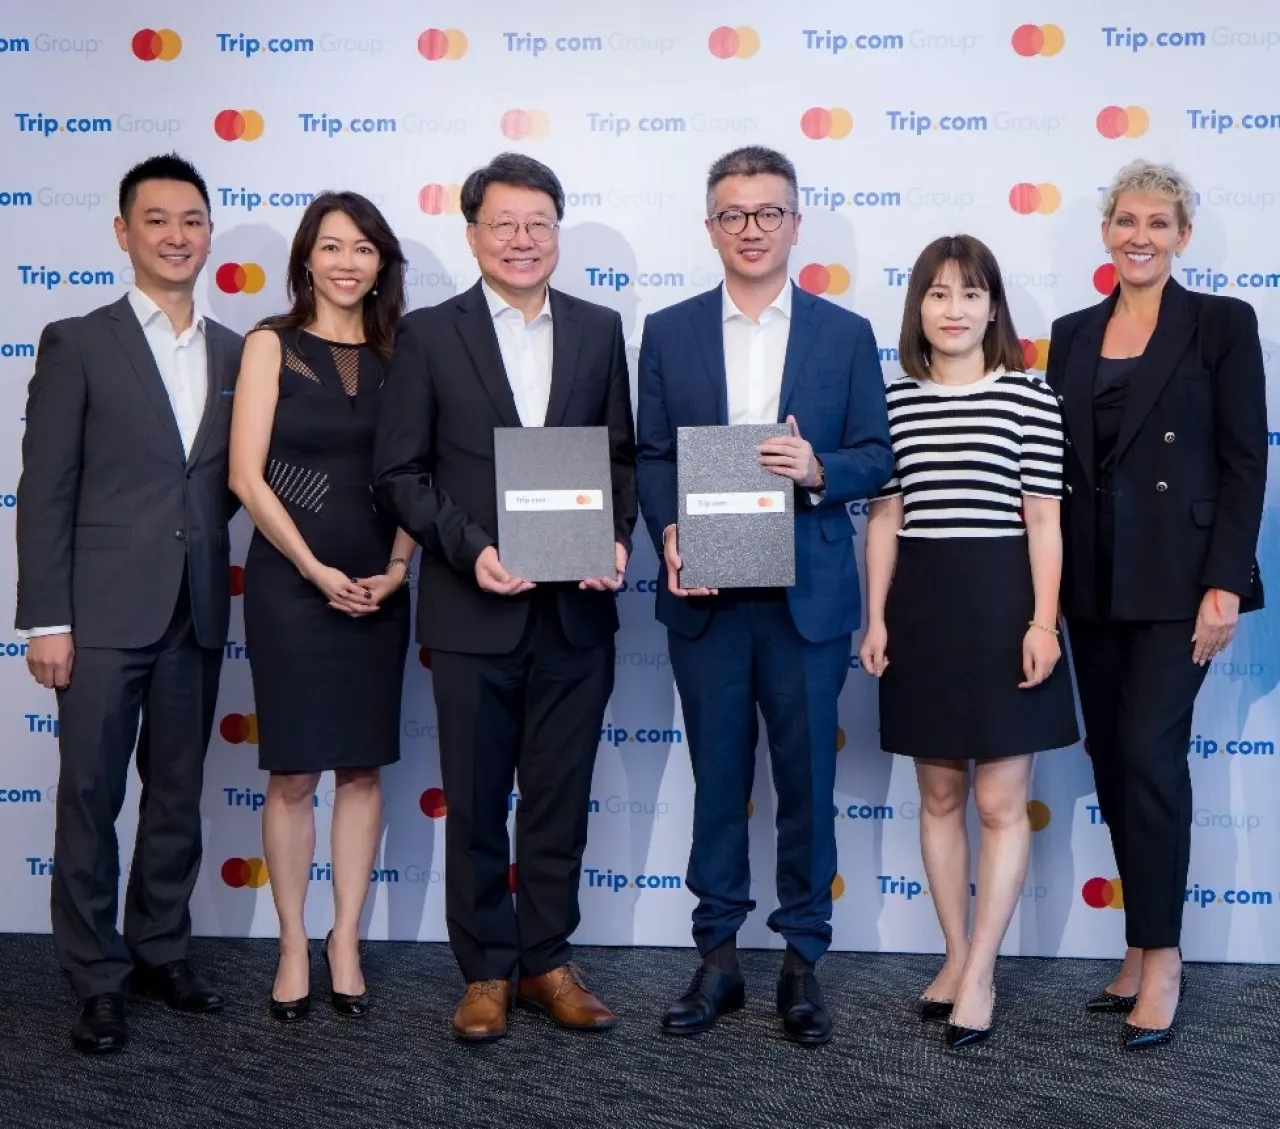 The Trip.com Group and Mastercard APAC teams to collaborate and offer enhanced travel experiences and travel privileges, led by Mr. Bo Sun, Trip.com Group's Chief Marketing Officer (third from right) and Mr. Yunsok Chang (fourth from right), Executive Vice President of Market Development, Mastercard Asia Pacific img#2